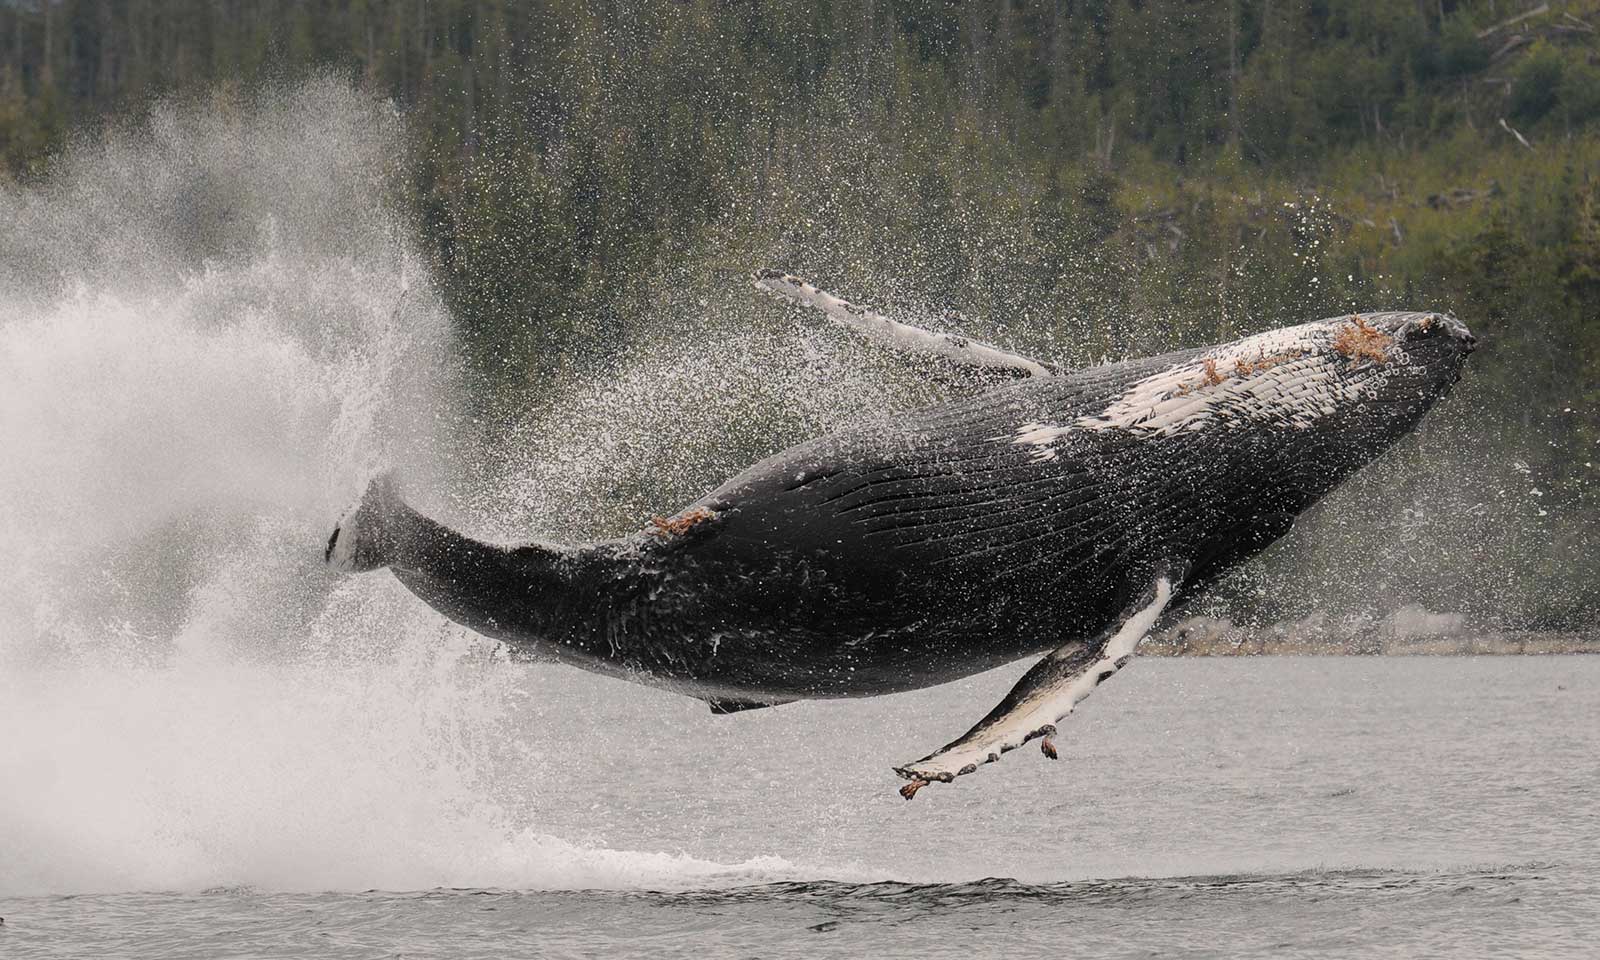 mers marine education research society whale fully above water splashing